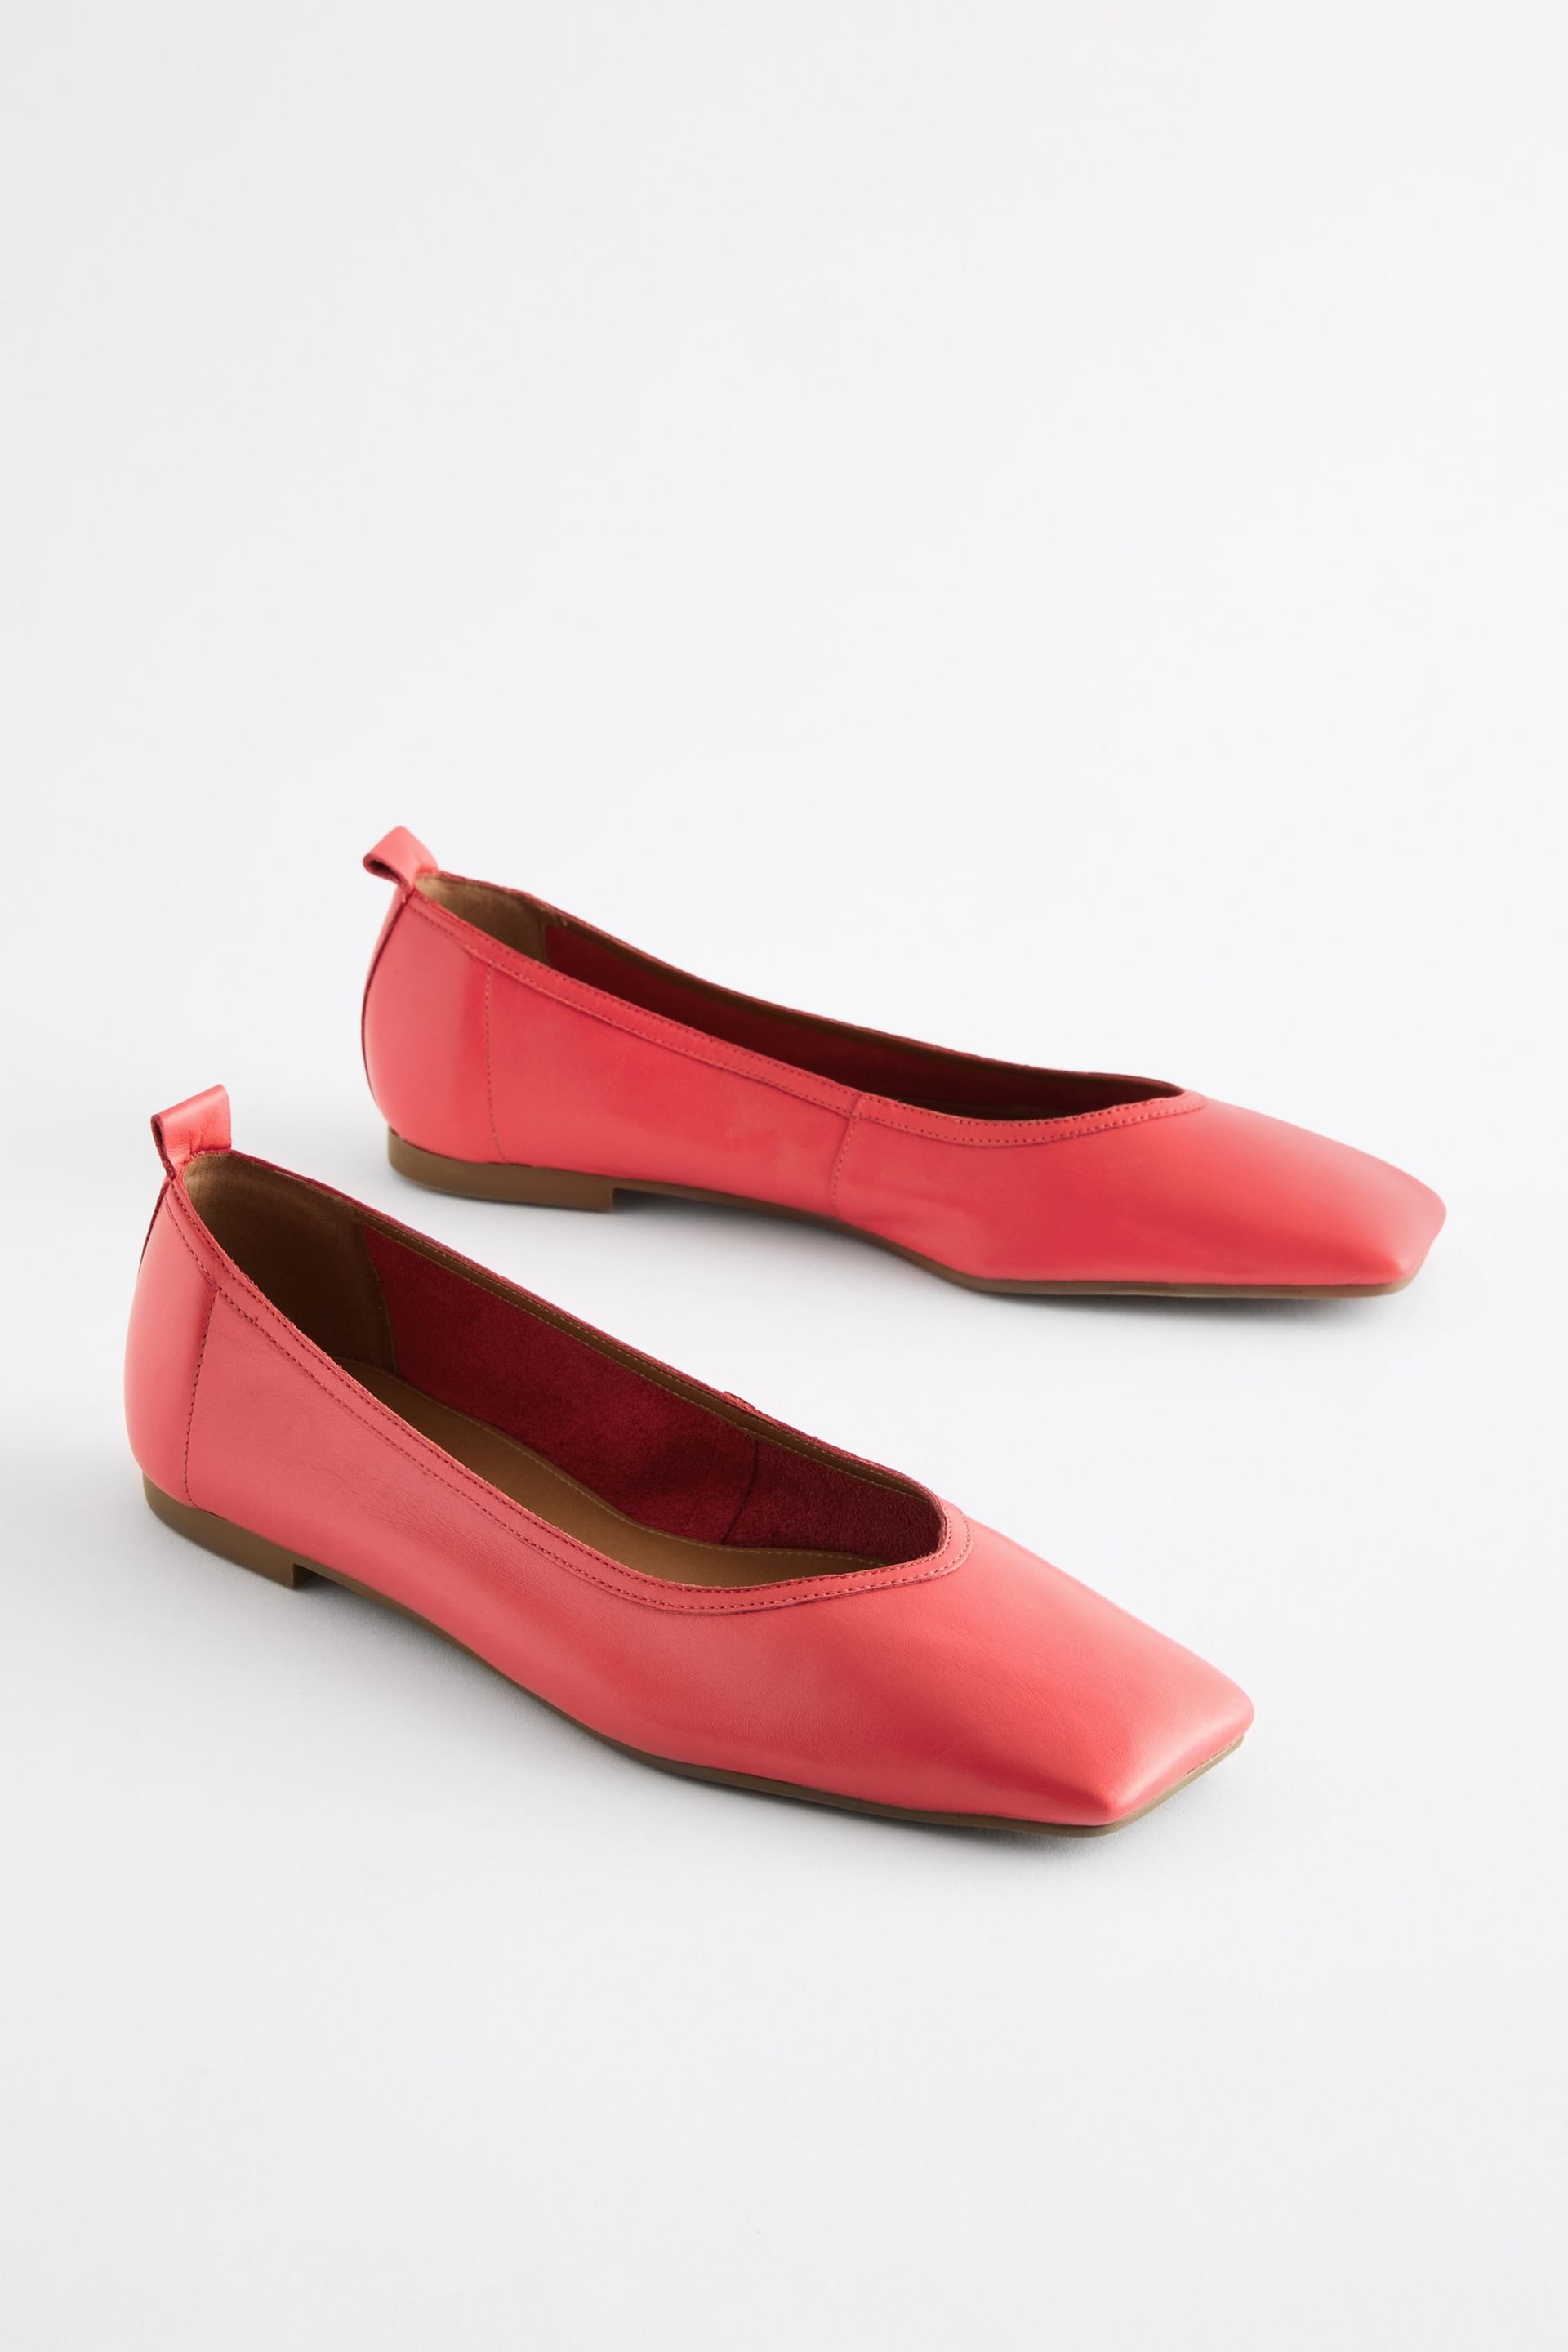 Pink Signature Square Toe Leather Ballerinas - Image 6 of 10